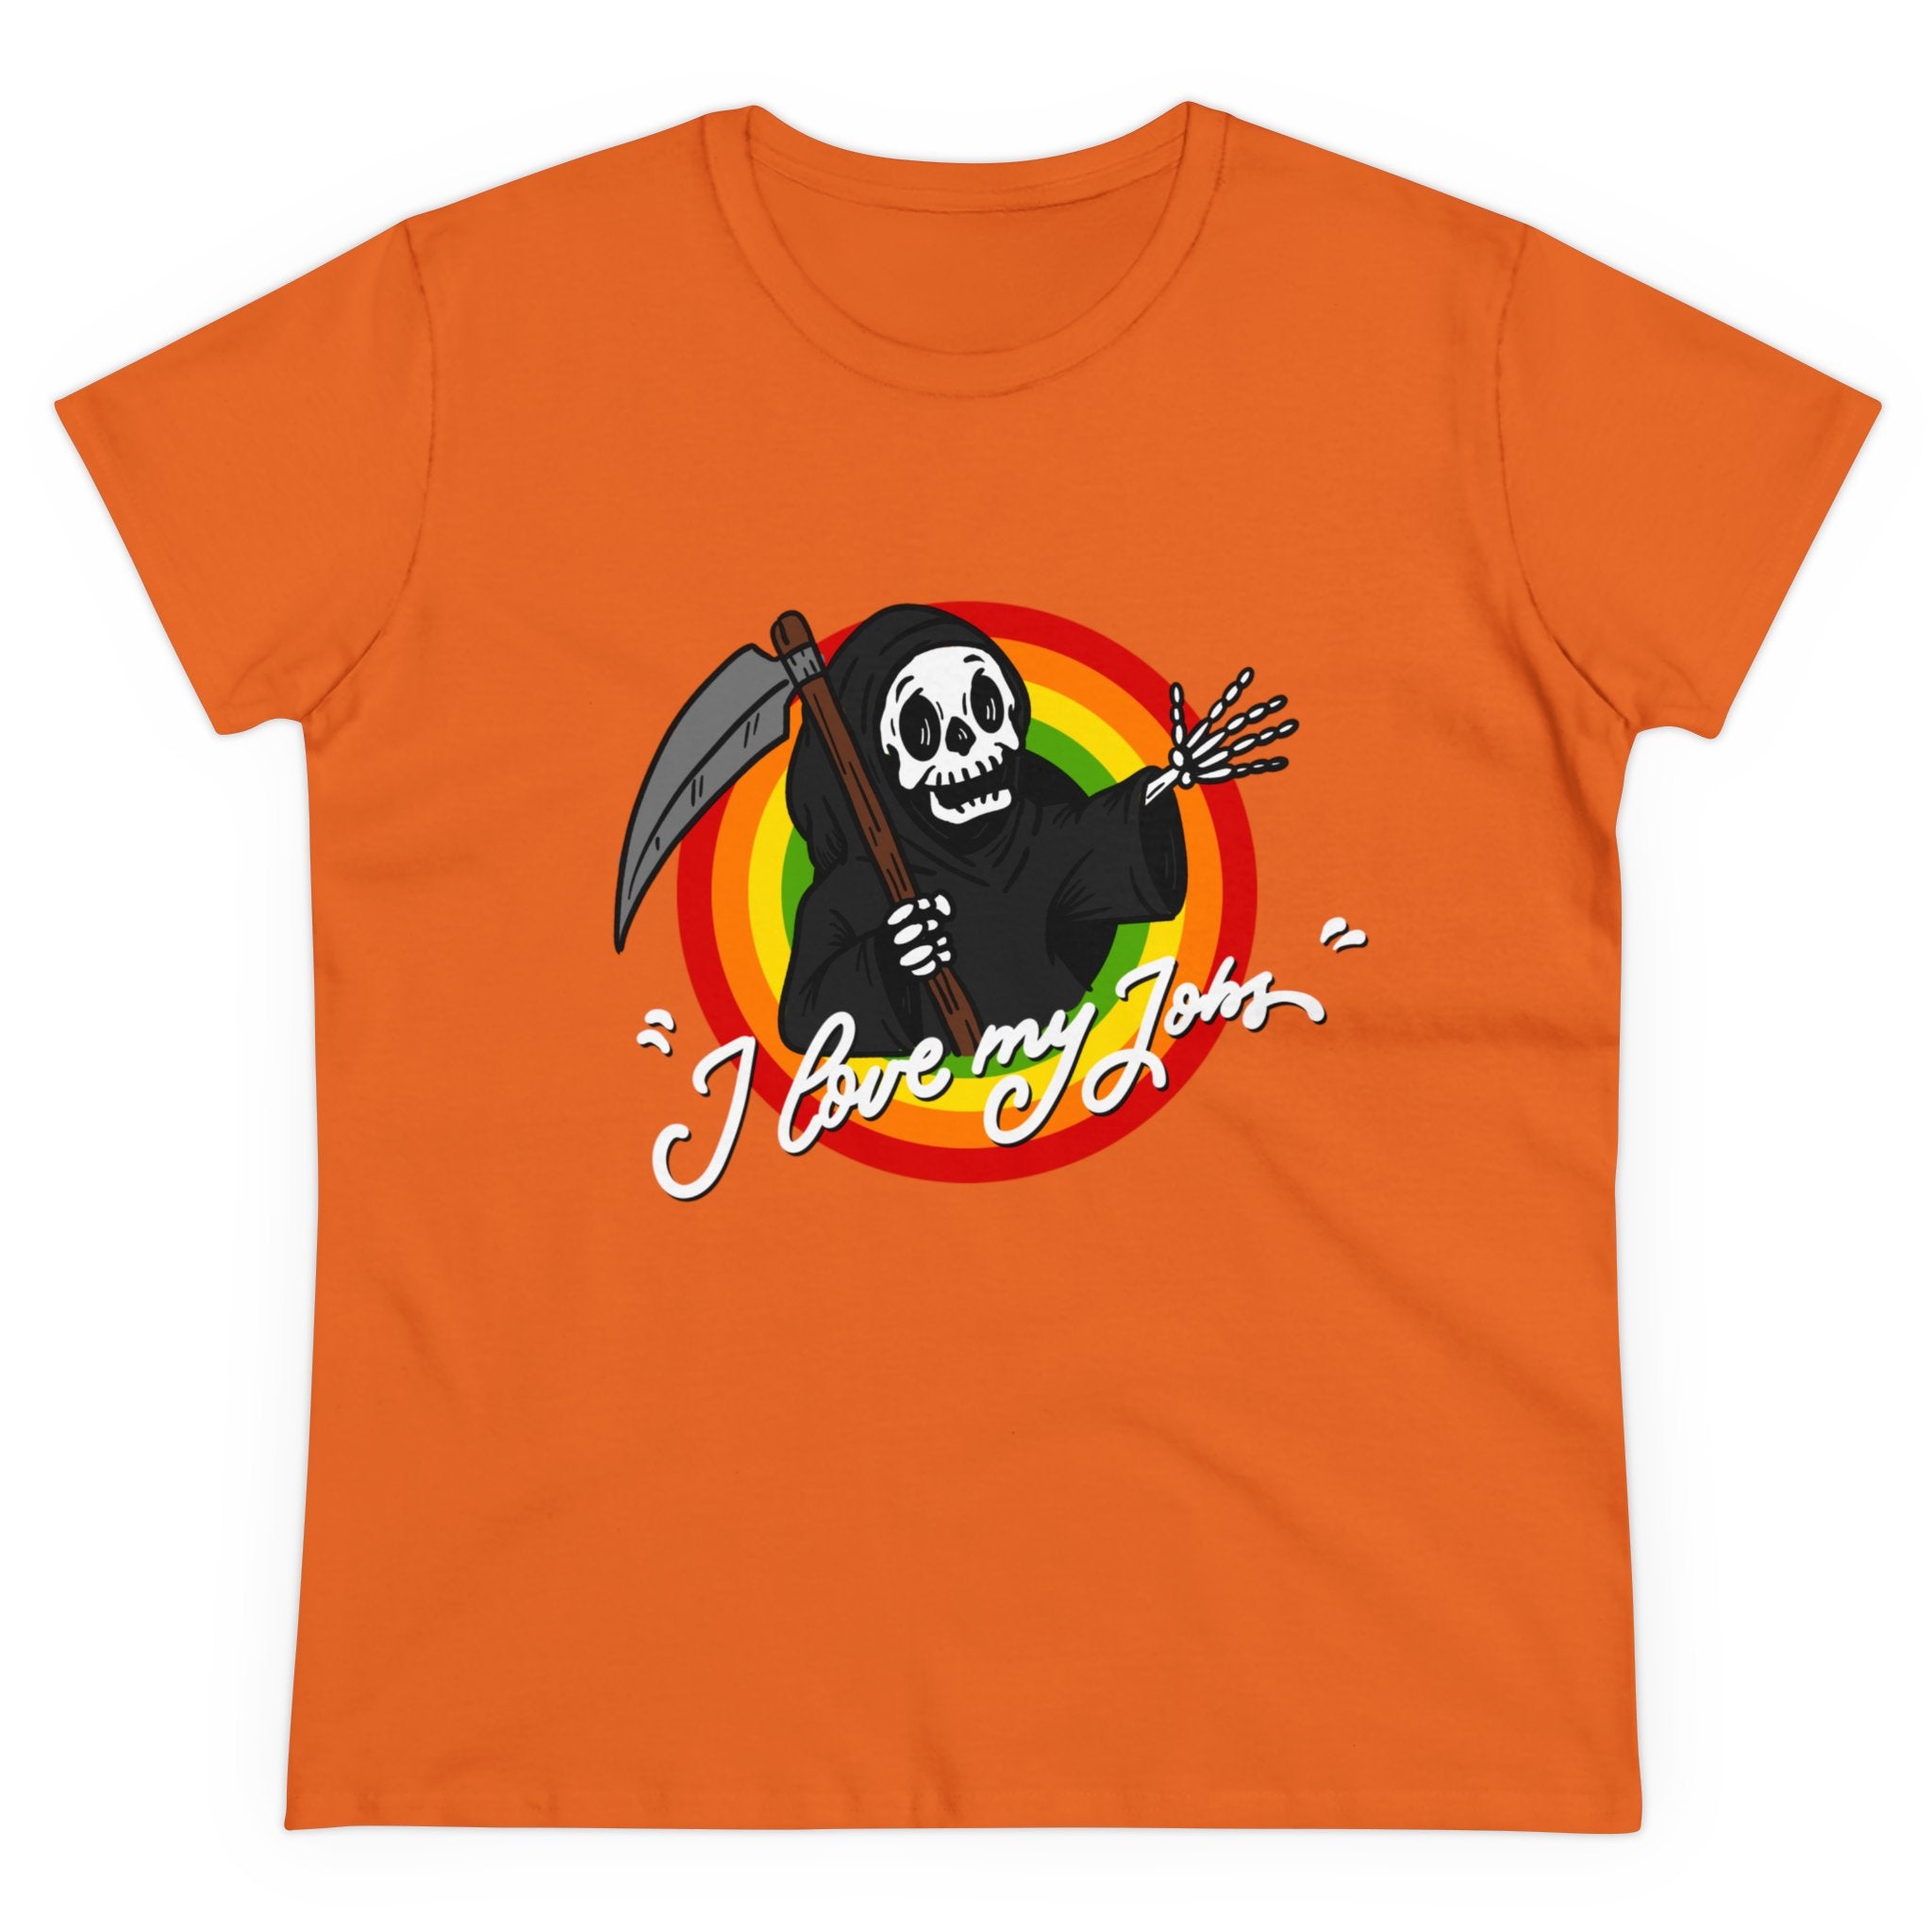 Orange T-shirt featuring a cartoon Grim Reaper with a scythe and the text "I love my job" in playful font, made from soft, comfortable cotton. Perfect for fans of quirky humor, our Love My Jobs - Women's Tee is as comfy as it is fun.